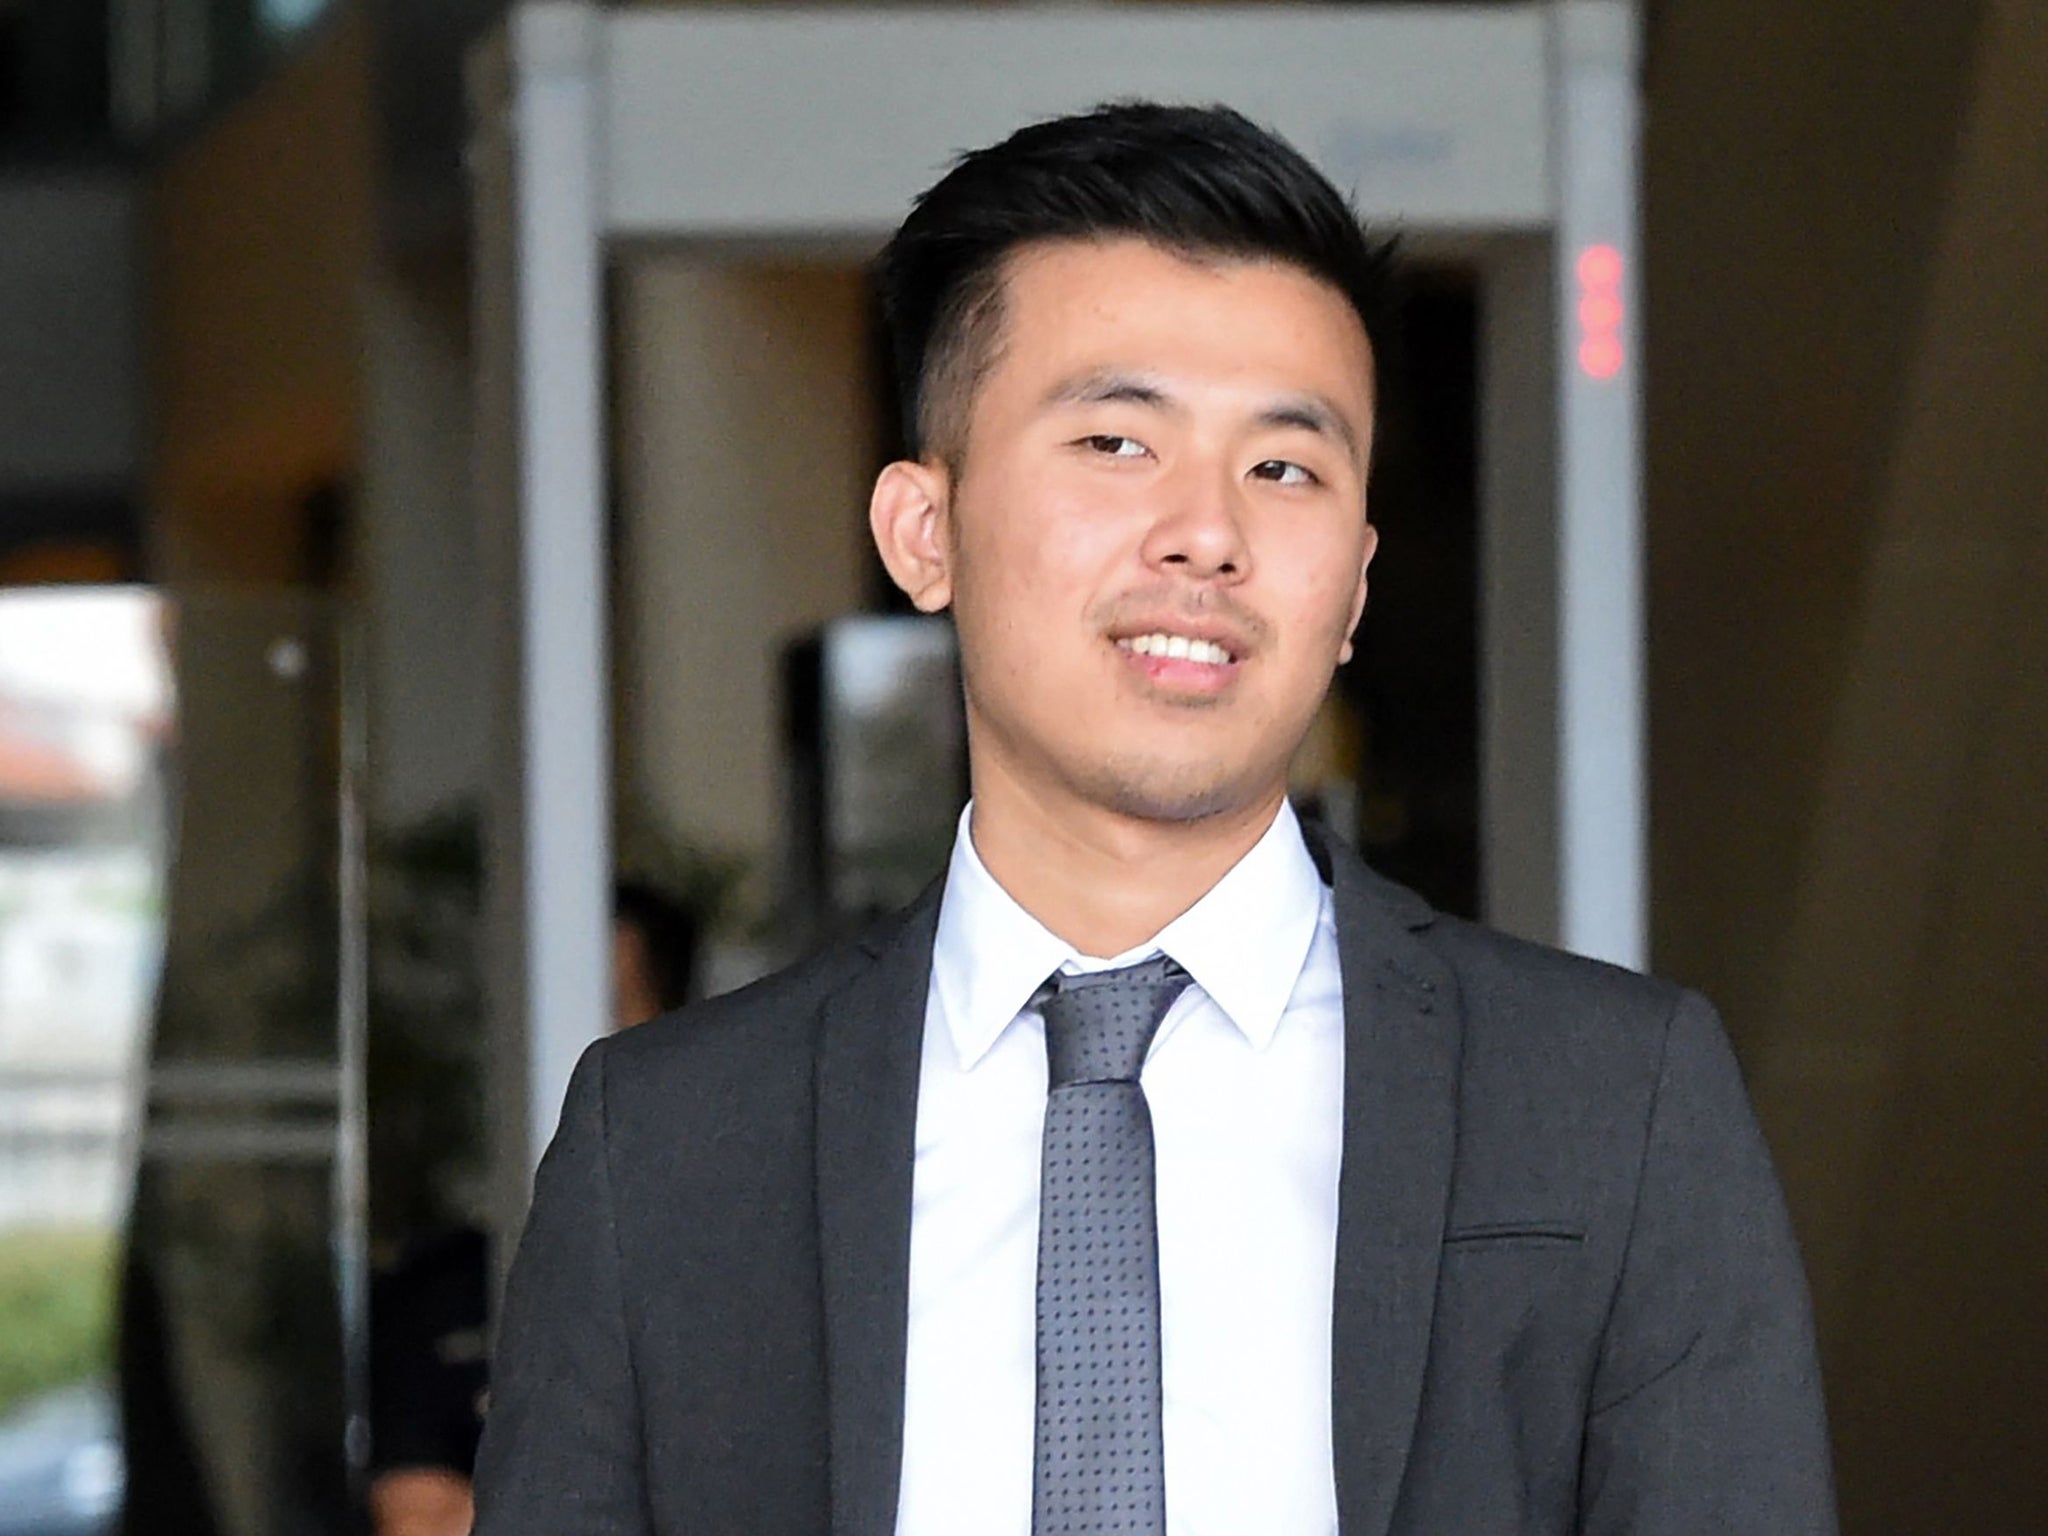 British national Khong Tam Thanh, 22, leaves the Singapore high court on 7 August, 2017